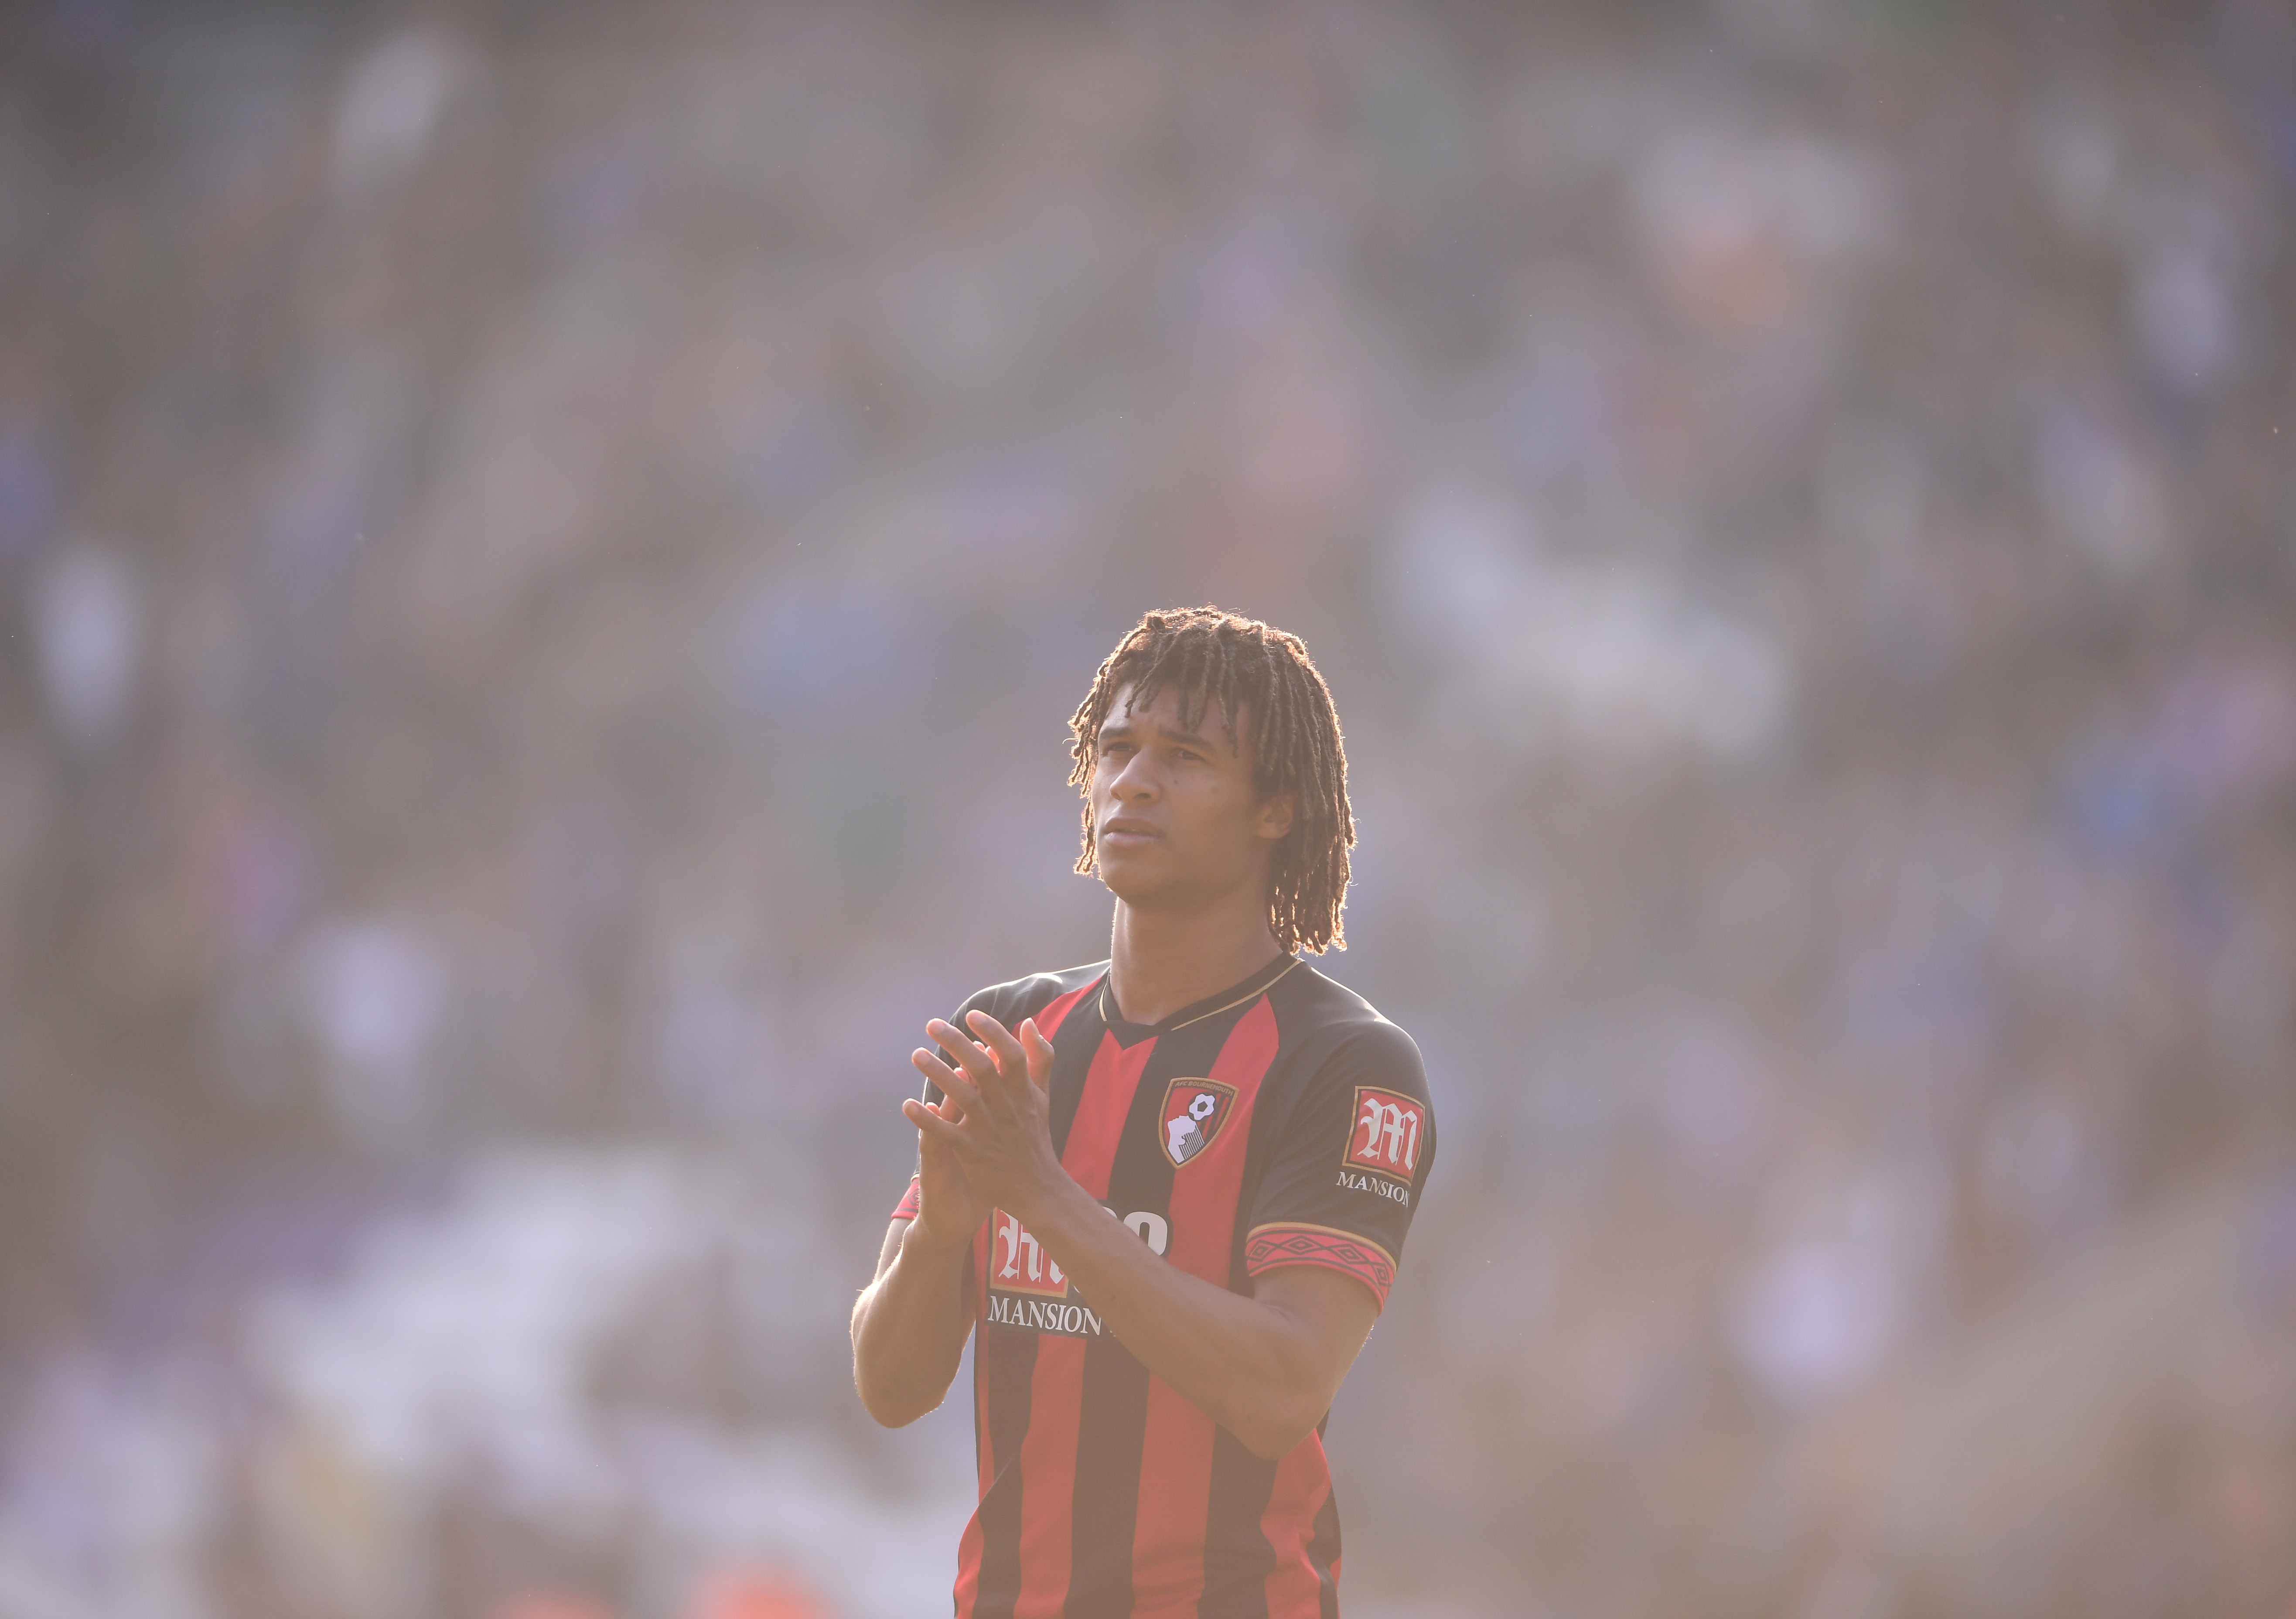 LEICESTER, ENGLAND - MARCH 30: Nathan Ake of Bournemouth looks on during the Premier League match between Leicester City and AFC Bournemouth at The King Power Stadium on March 30, 2019 in Leicester, United Kingdom. (Photo by Laurence Griffiths/Getty Images)